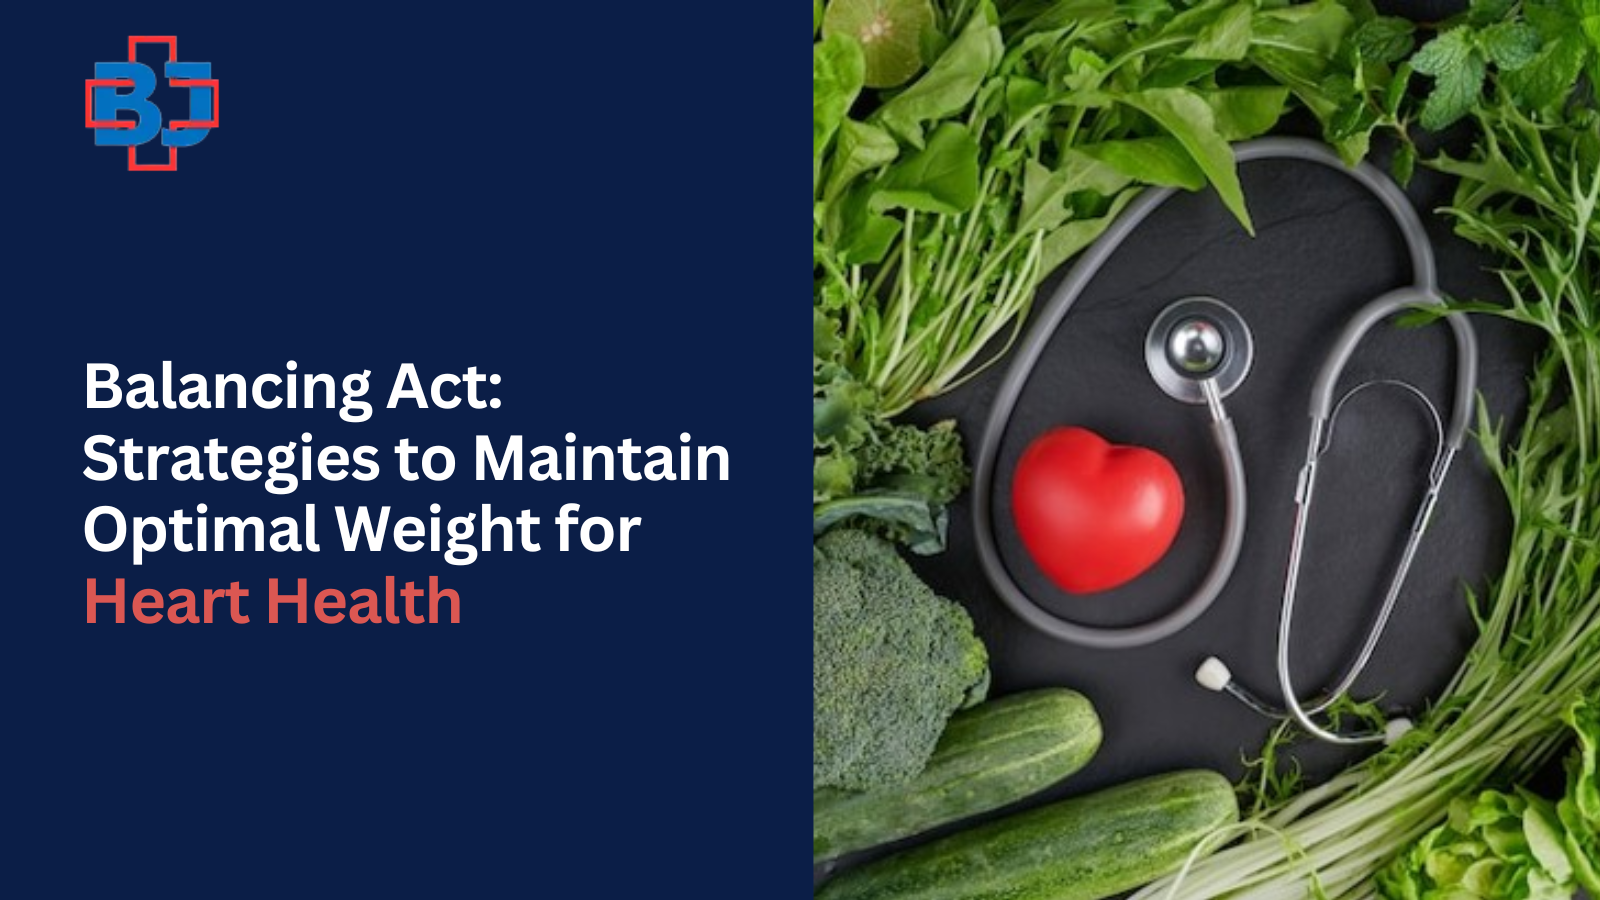 Balancing Act: Strategies to Maintain Optimal Weight for Heart Health